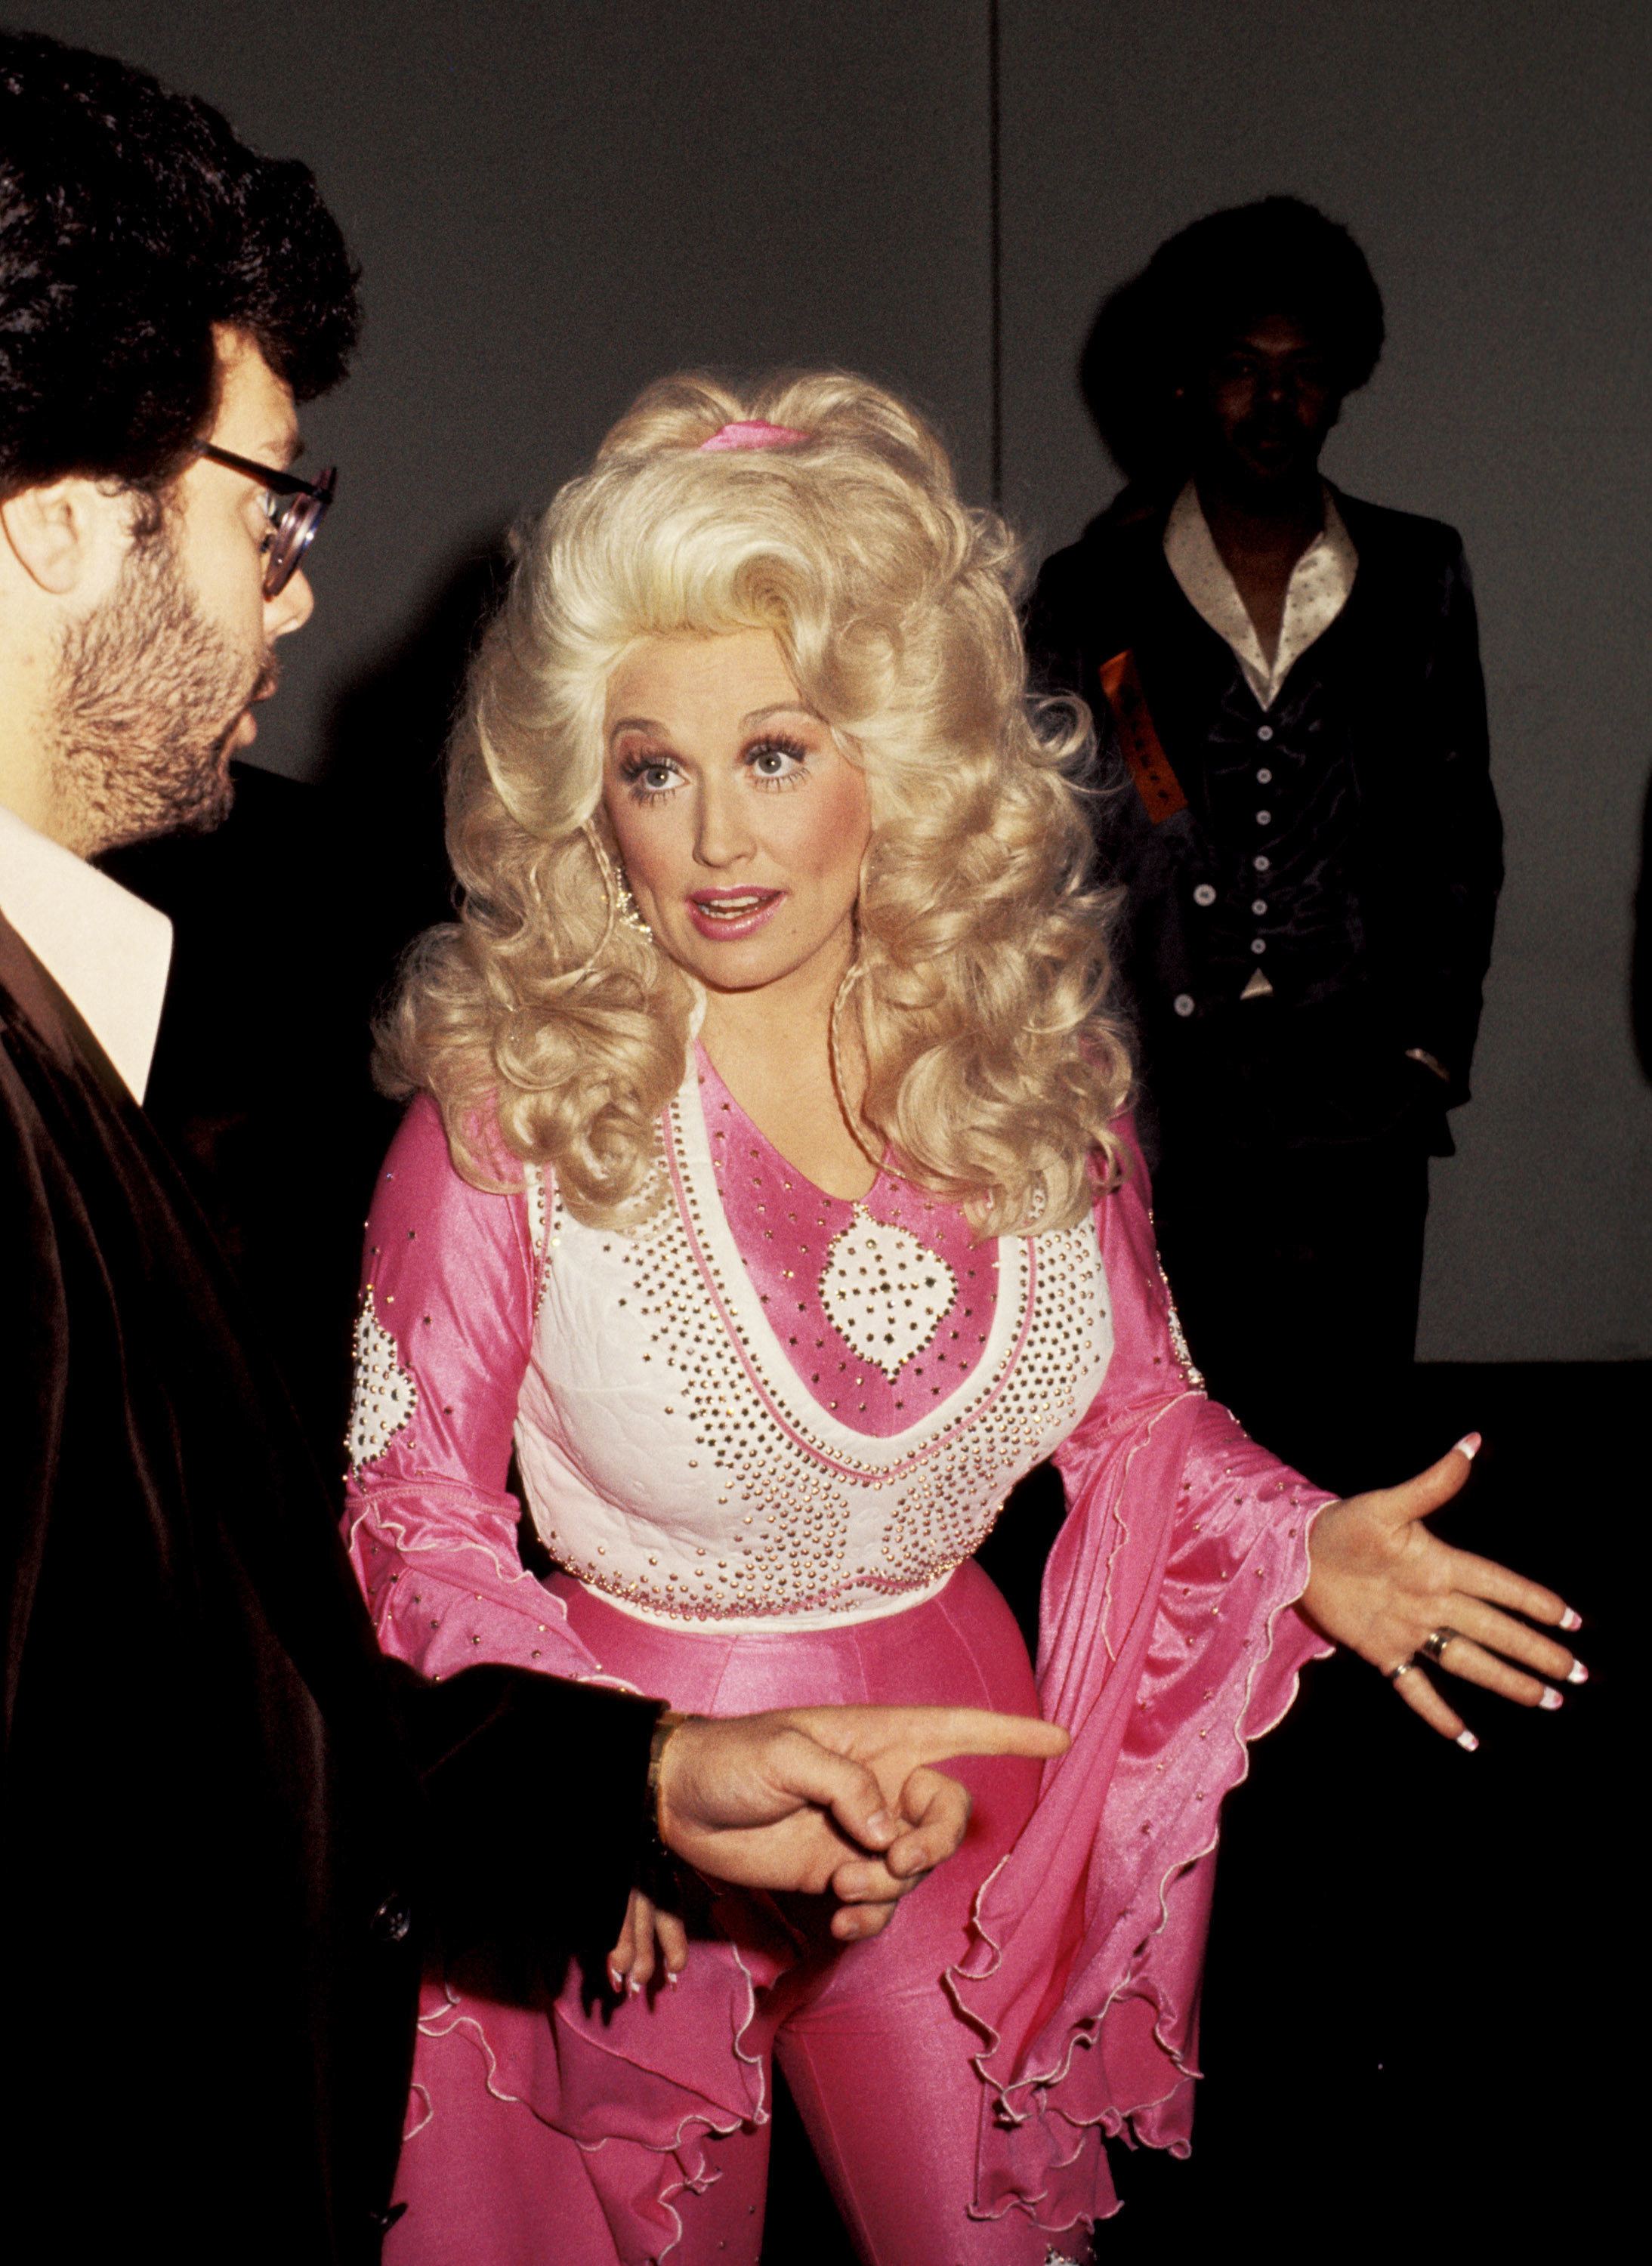 Dolly Parton at the 1977 Grammys in a tight pink jumpsuit with a white bedazzled vest